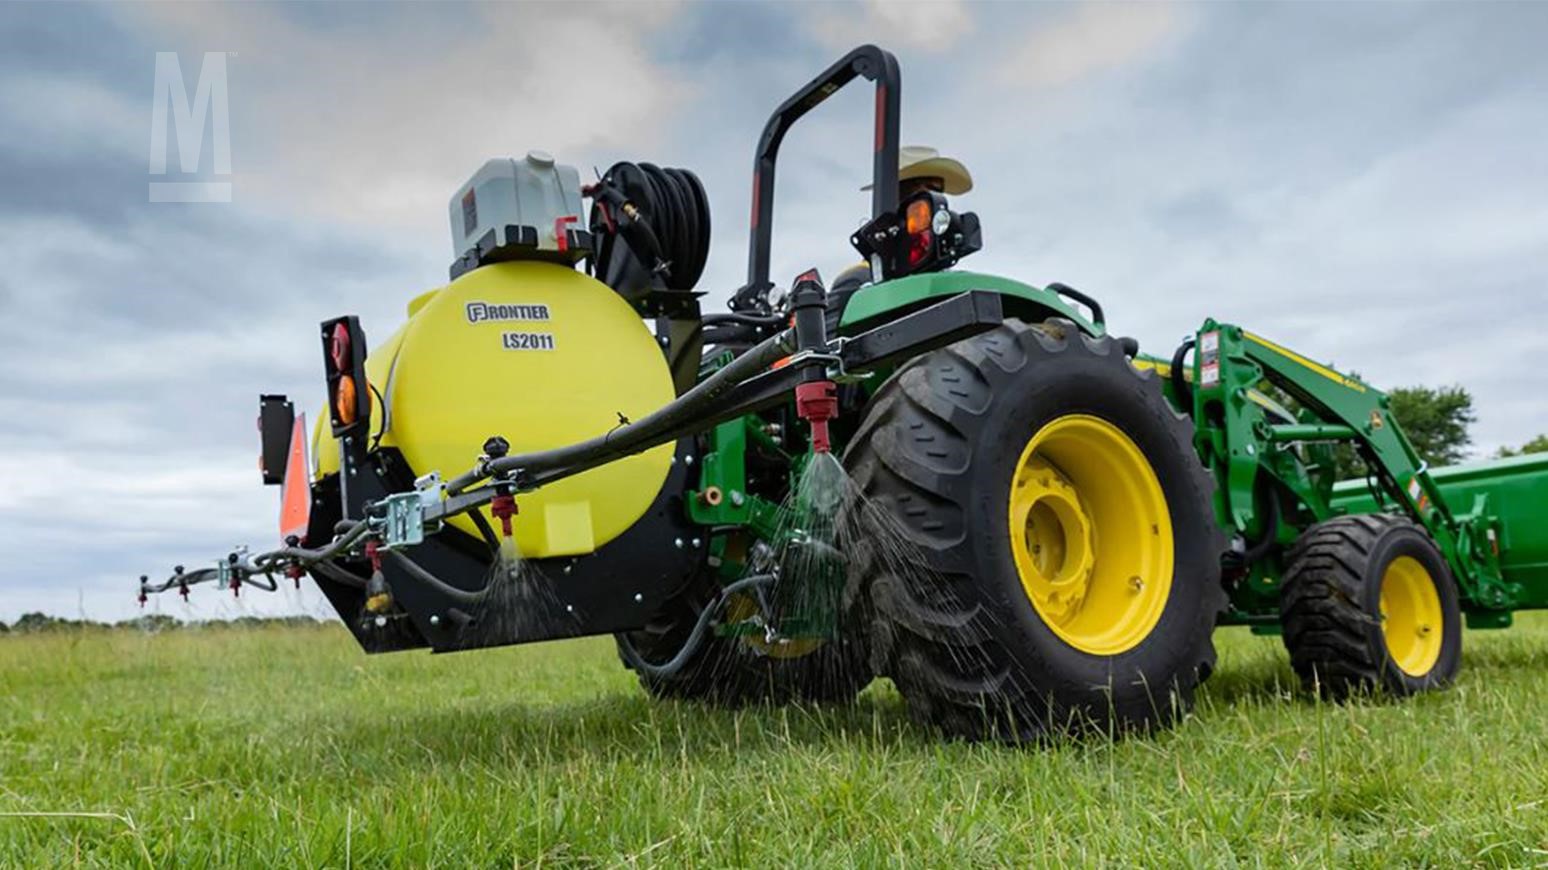 John Deere Introduces New Compact Sprayers And Material Handling Equipment To Frontier Line